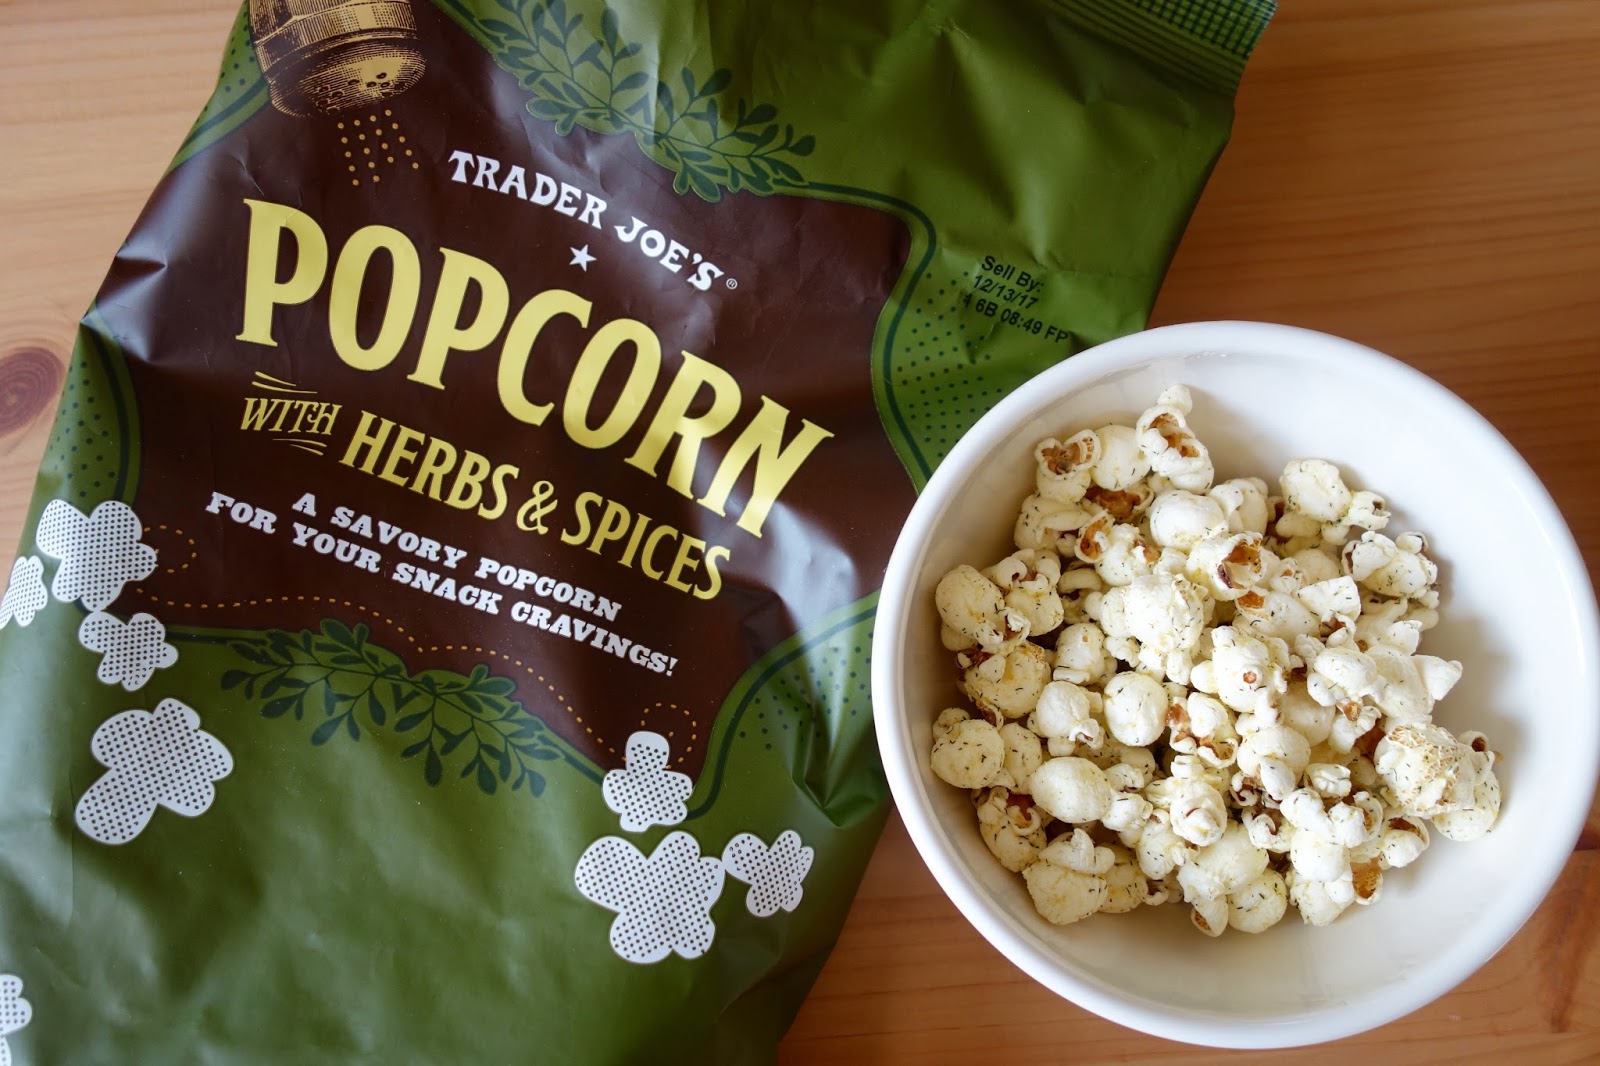 The pickle and ranch seasonings make really great popcorn! : r/traderjoes